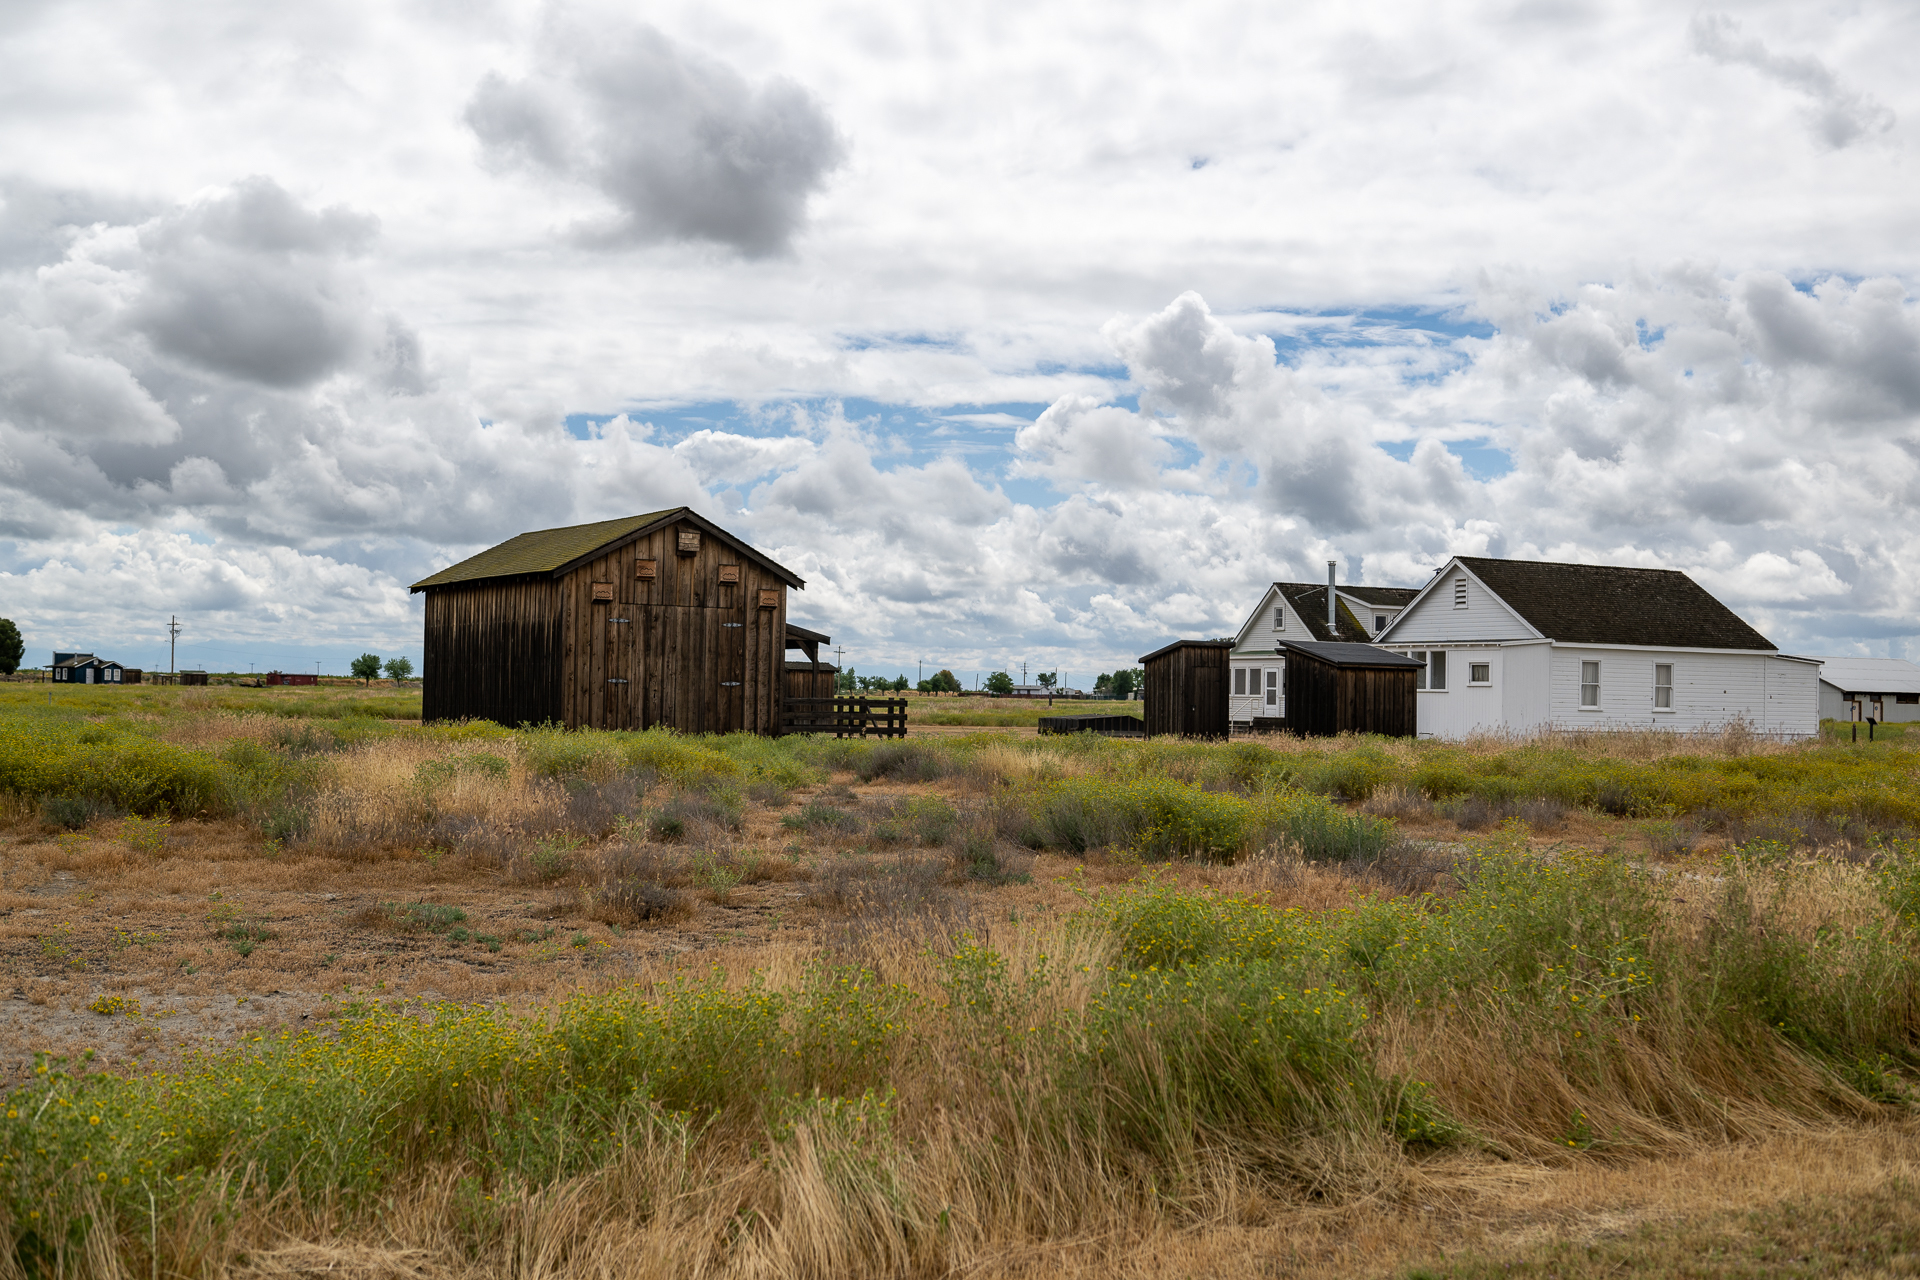 An open field with green and tan weeds and plants sits under a gray, cloudy sky. In the center, a brown, wooden barn rests to the left of two, small white homes.